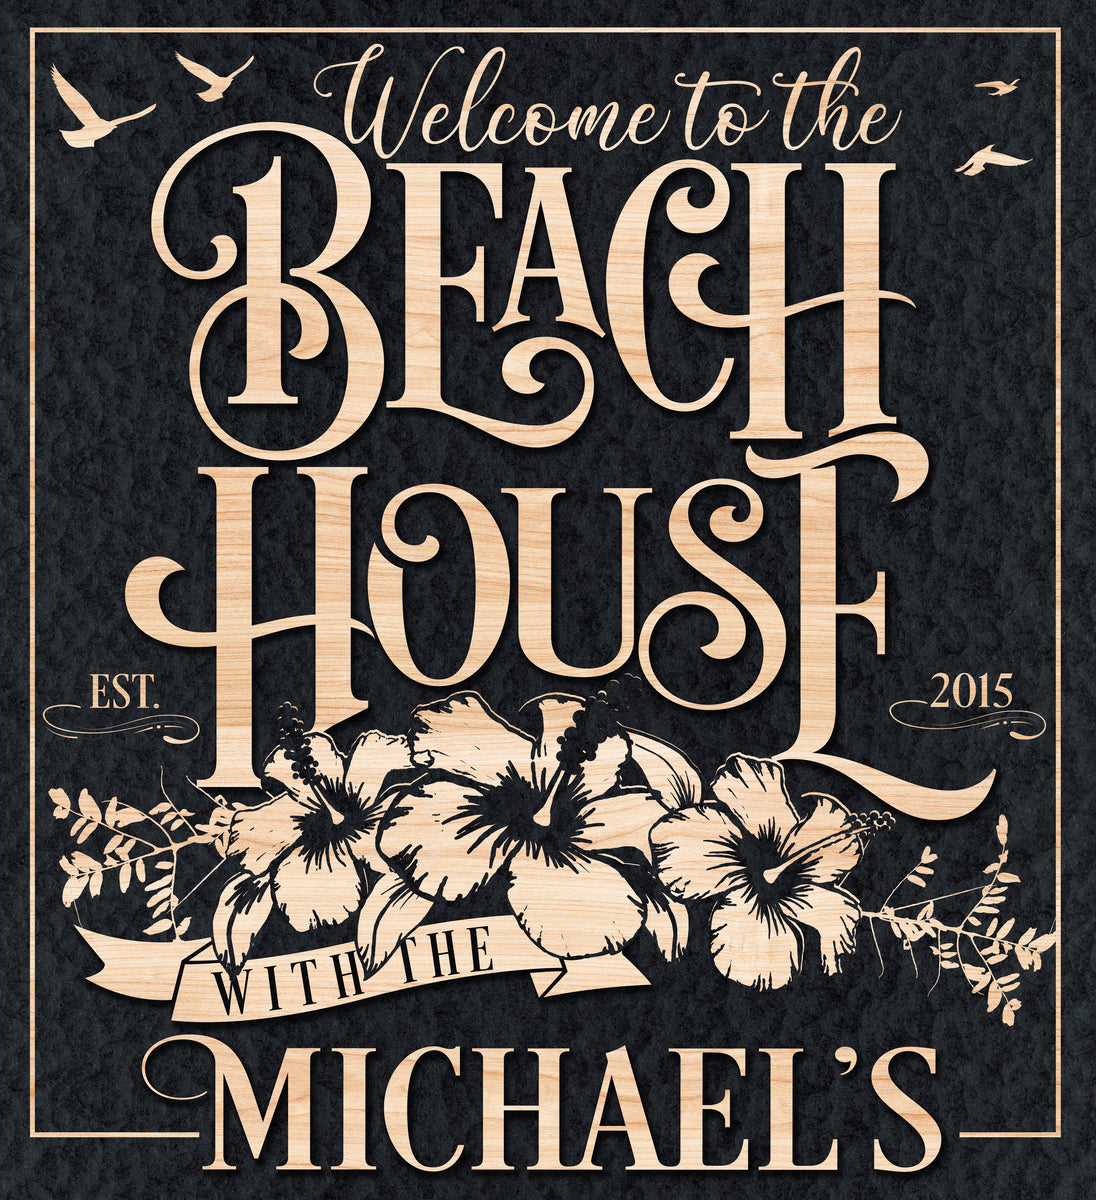 Coastal Wall Decor|Welcome to the Beach House Sign, Welcome to the Beach House, with the [family name] with est. dates.